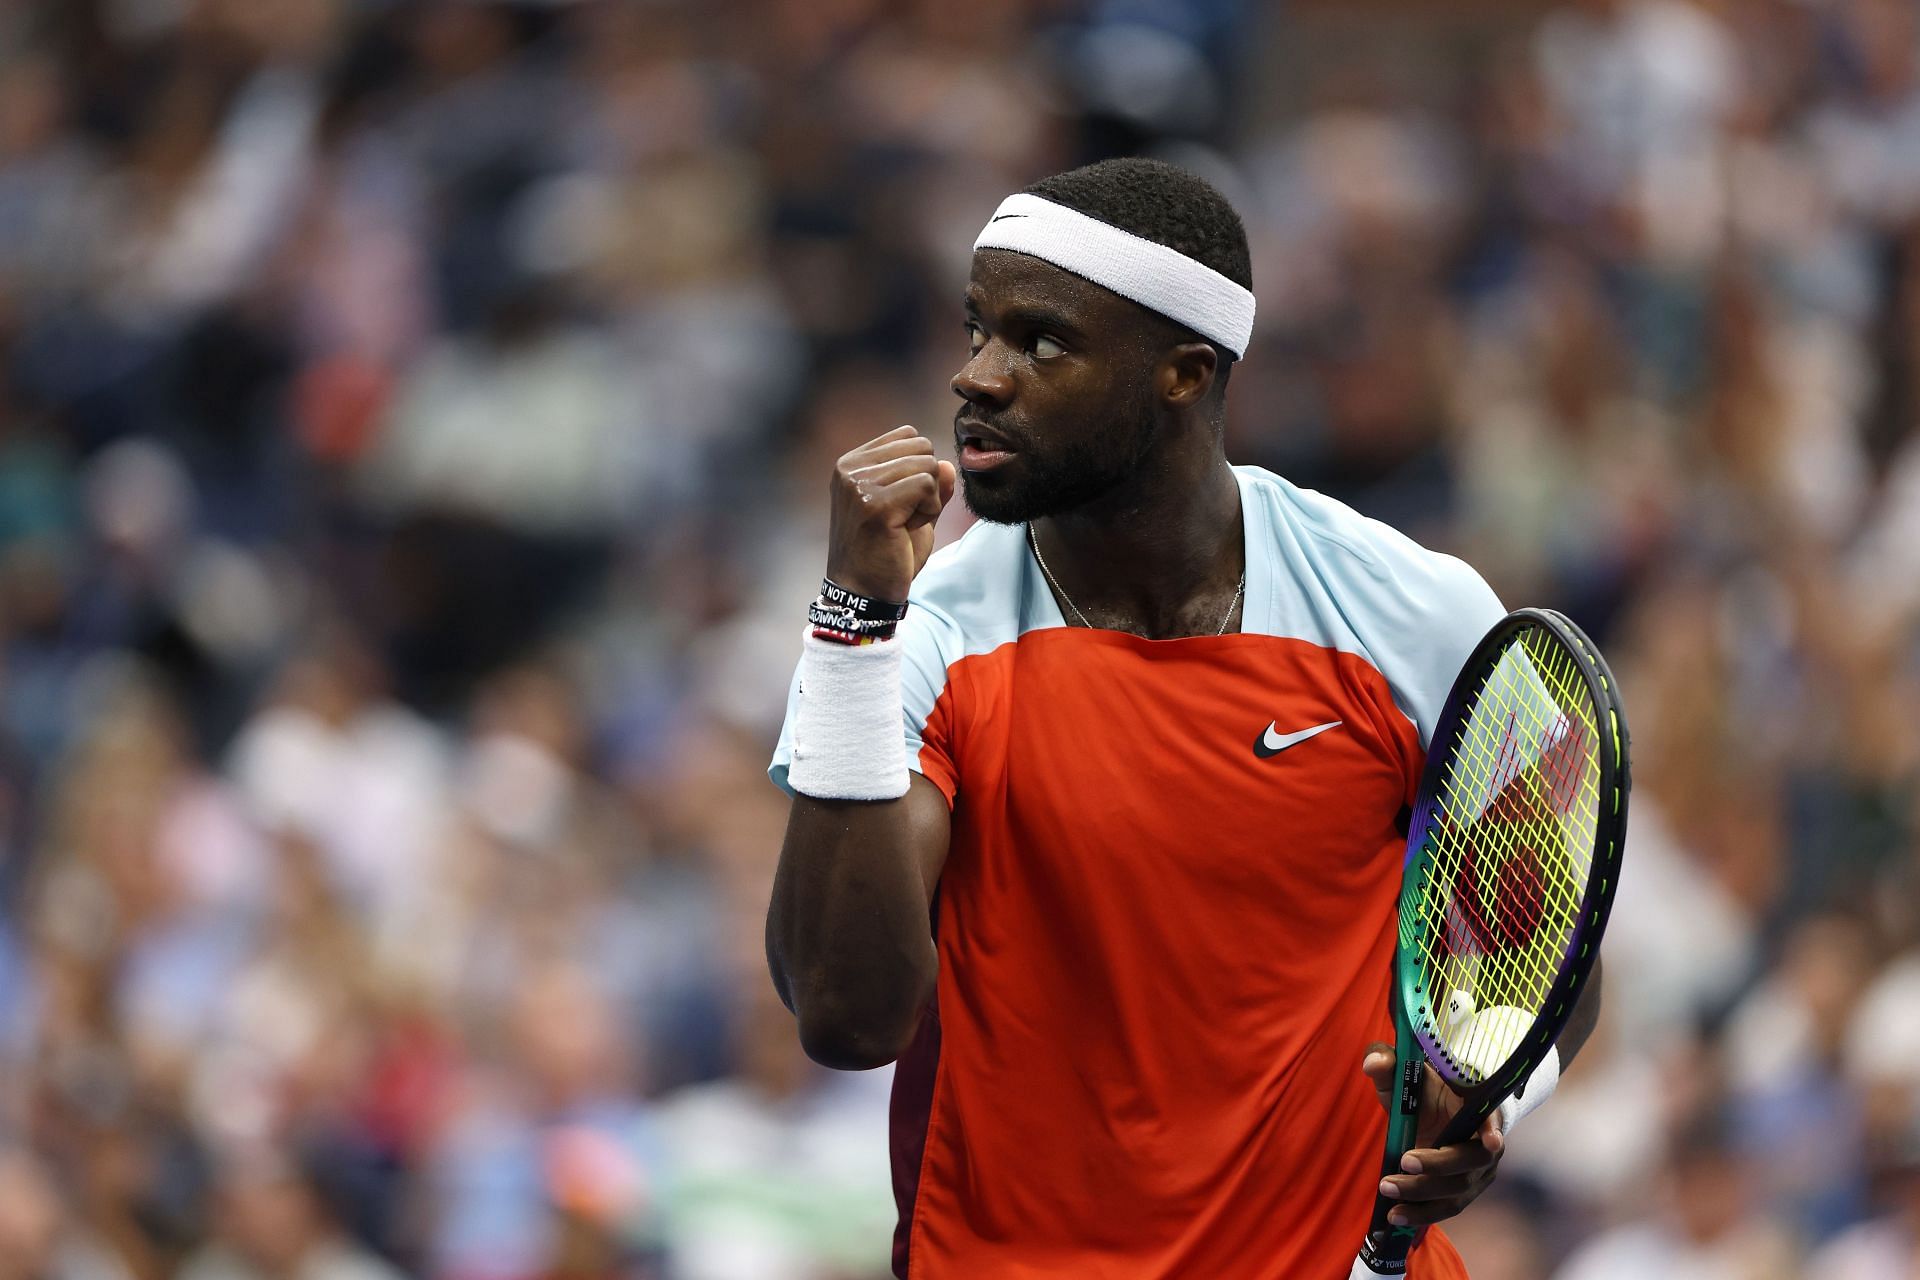 Frances Tiafoe is through to the 2022 US Open semifinals.